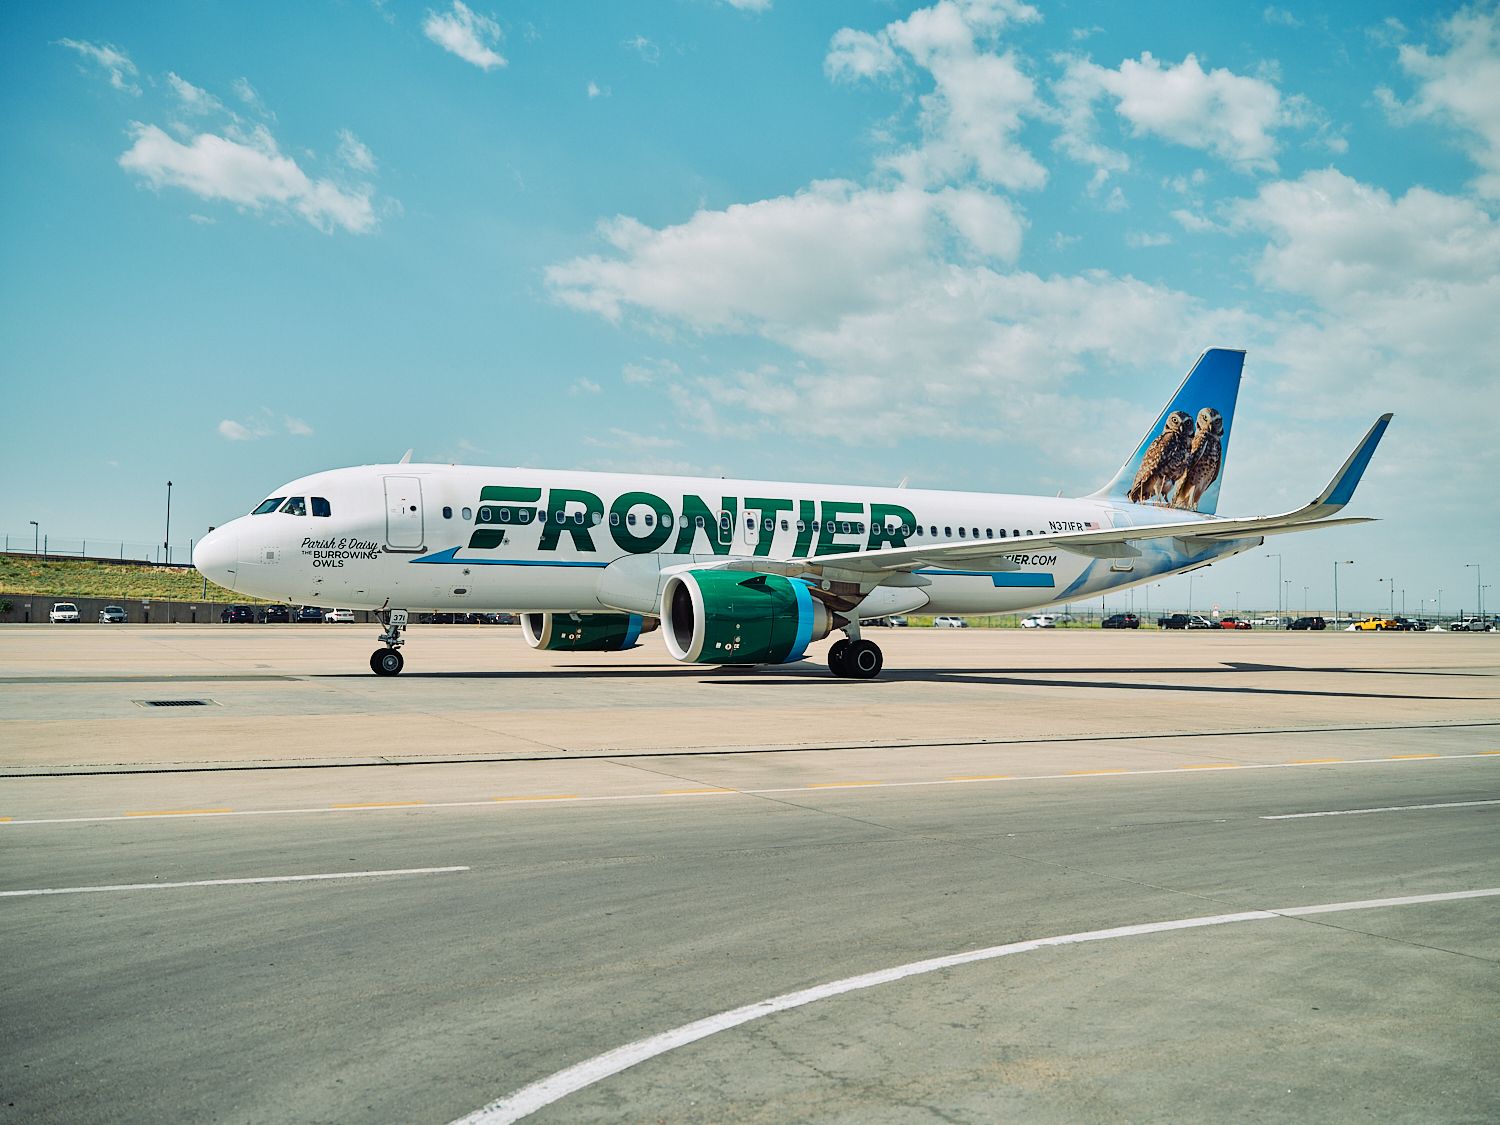 A Frontier Airlines A320neo on an airport apron.